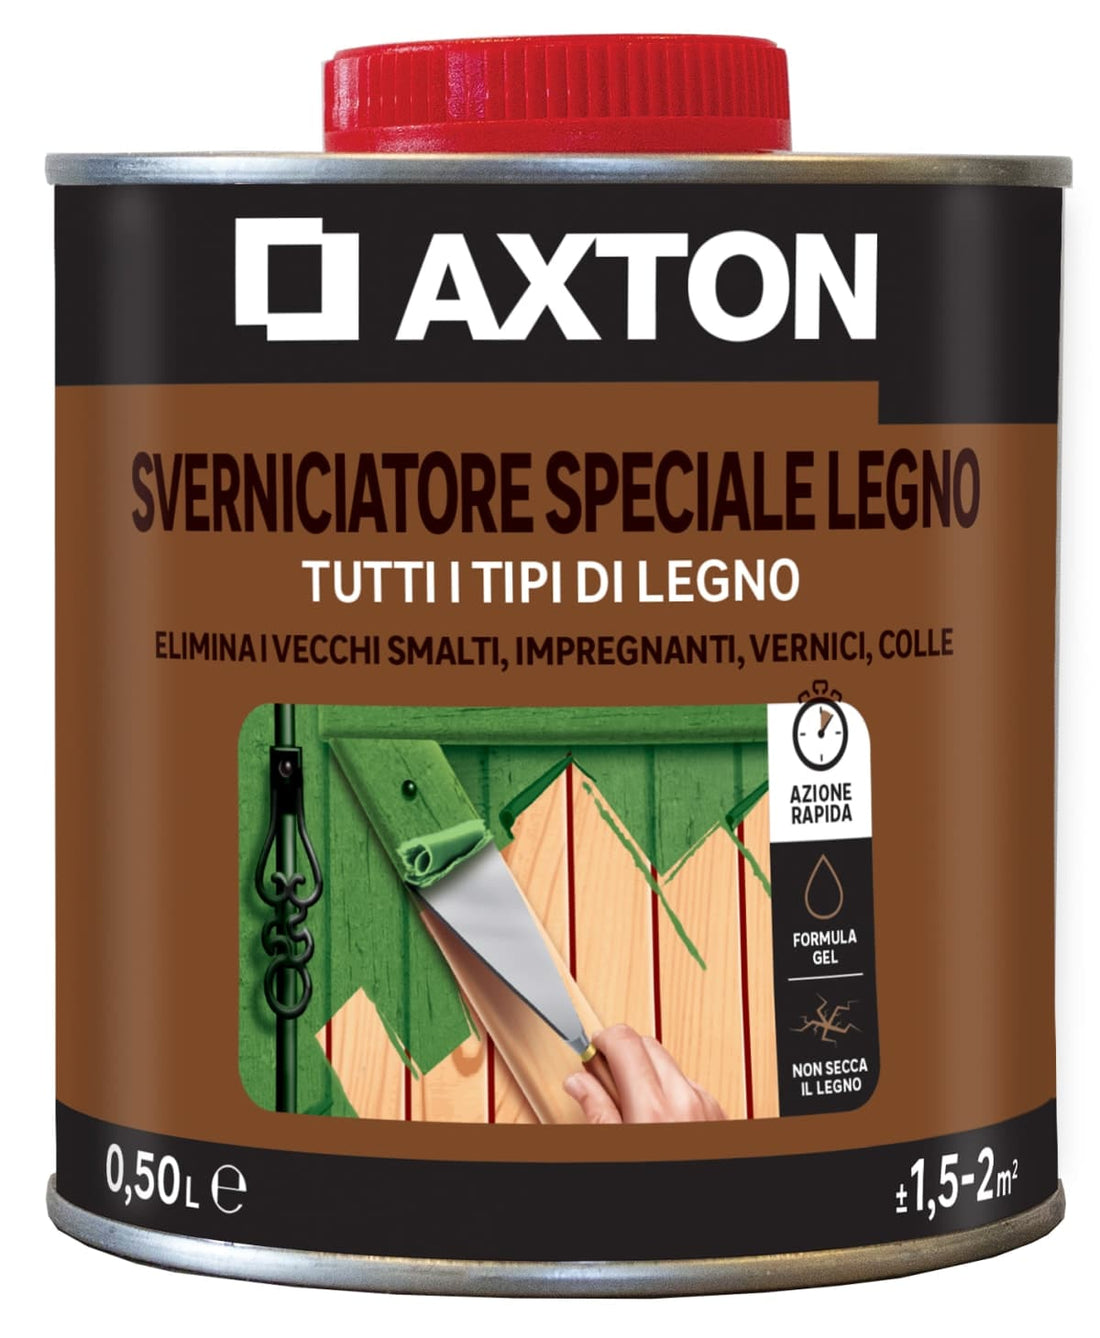 SOLVENT-BASED WOOD STRIPPER 0.5 L AXTON